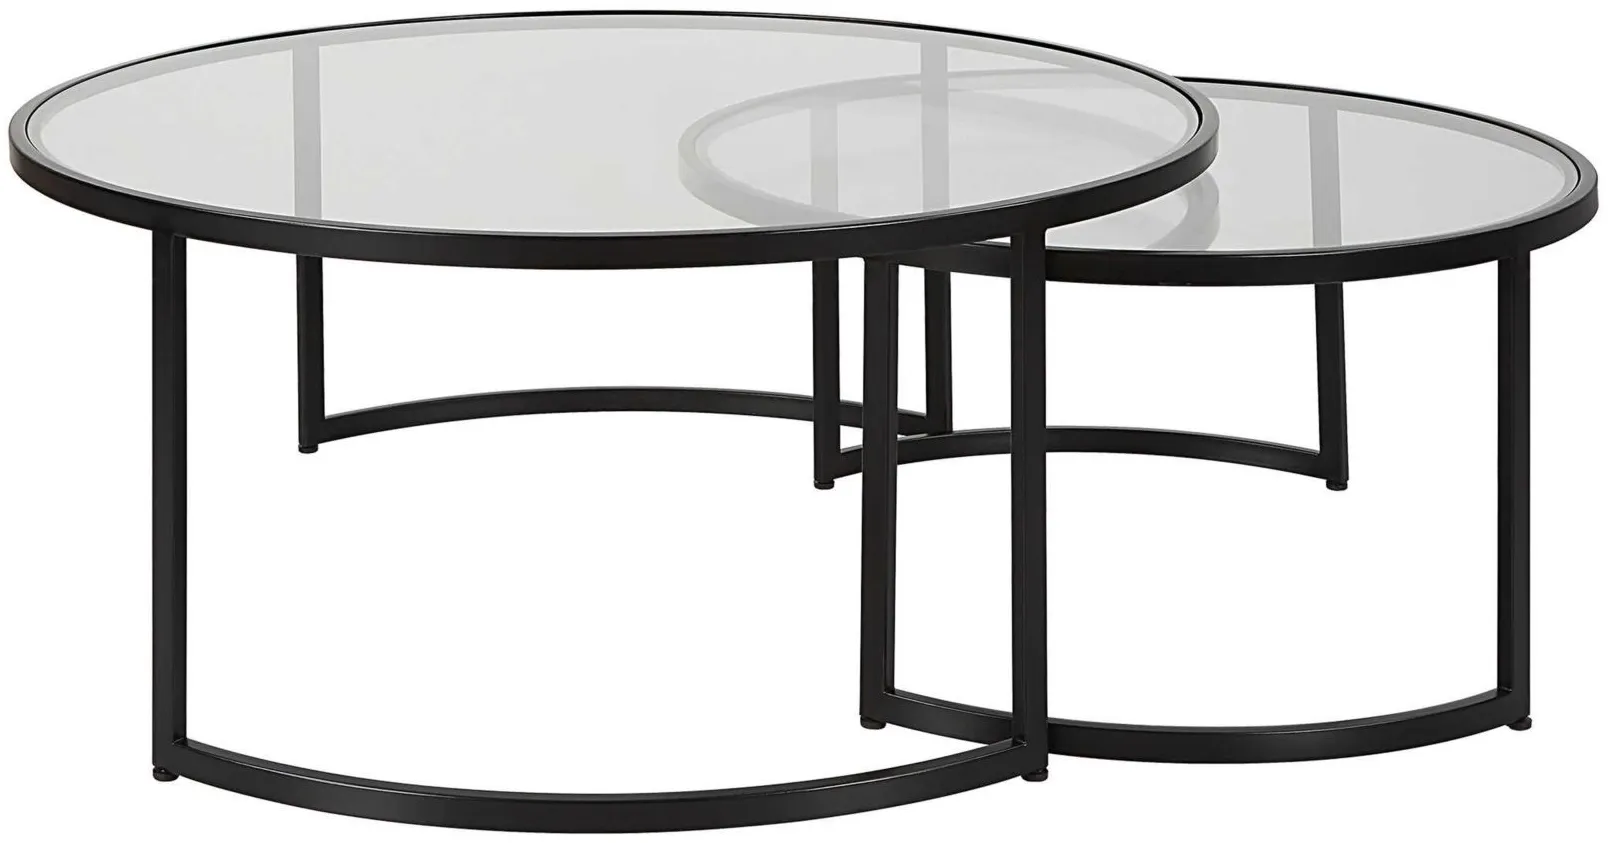 Rhea Round Nesting Coffee Table in black by Uttermost